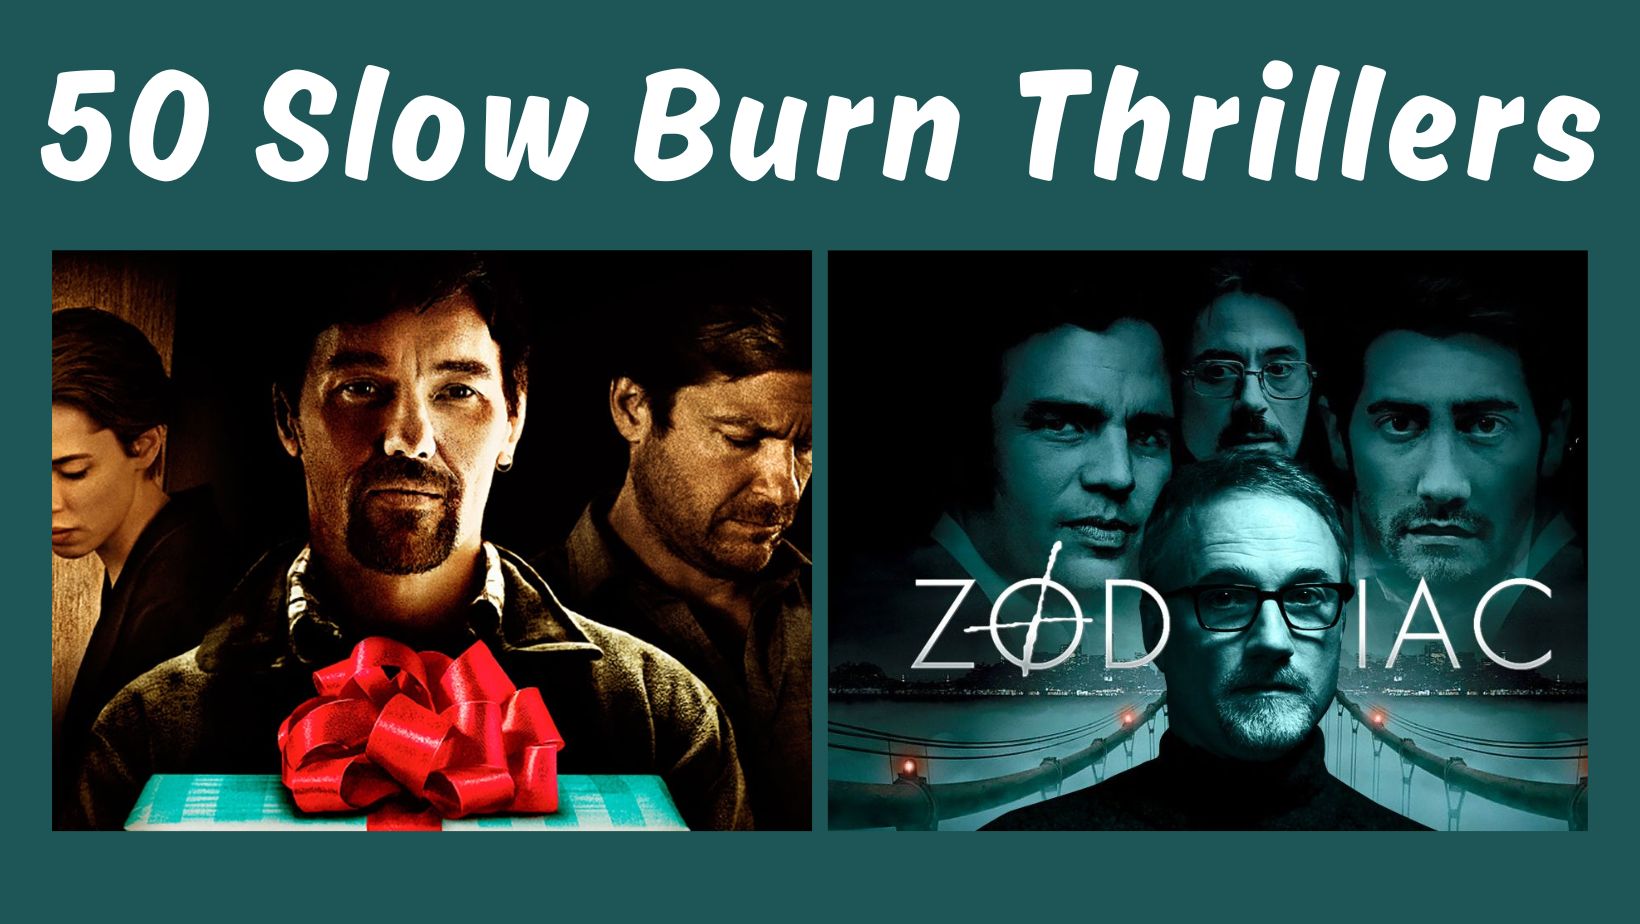 text "50 slow burn thrillers" with images from the movies "the gift" and "zodiac"